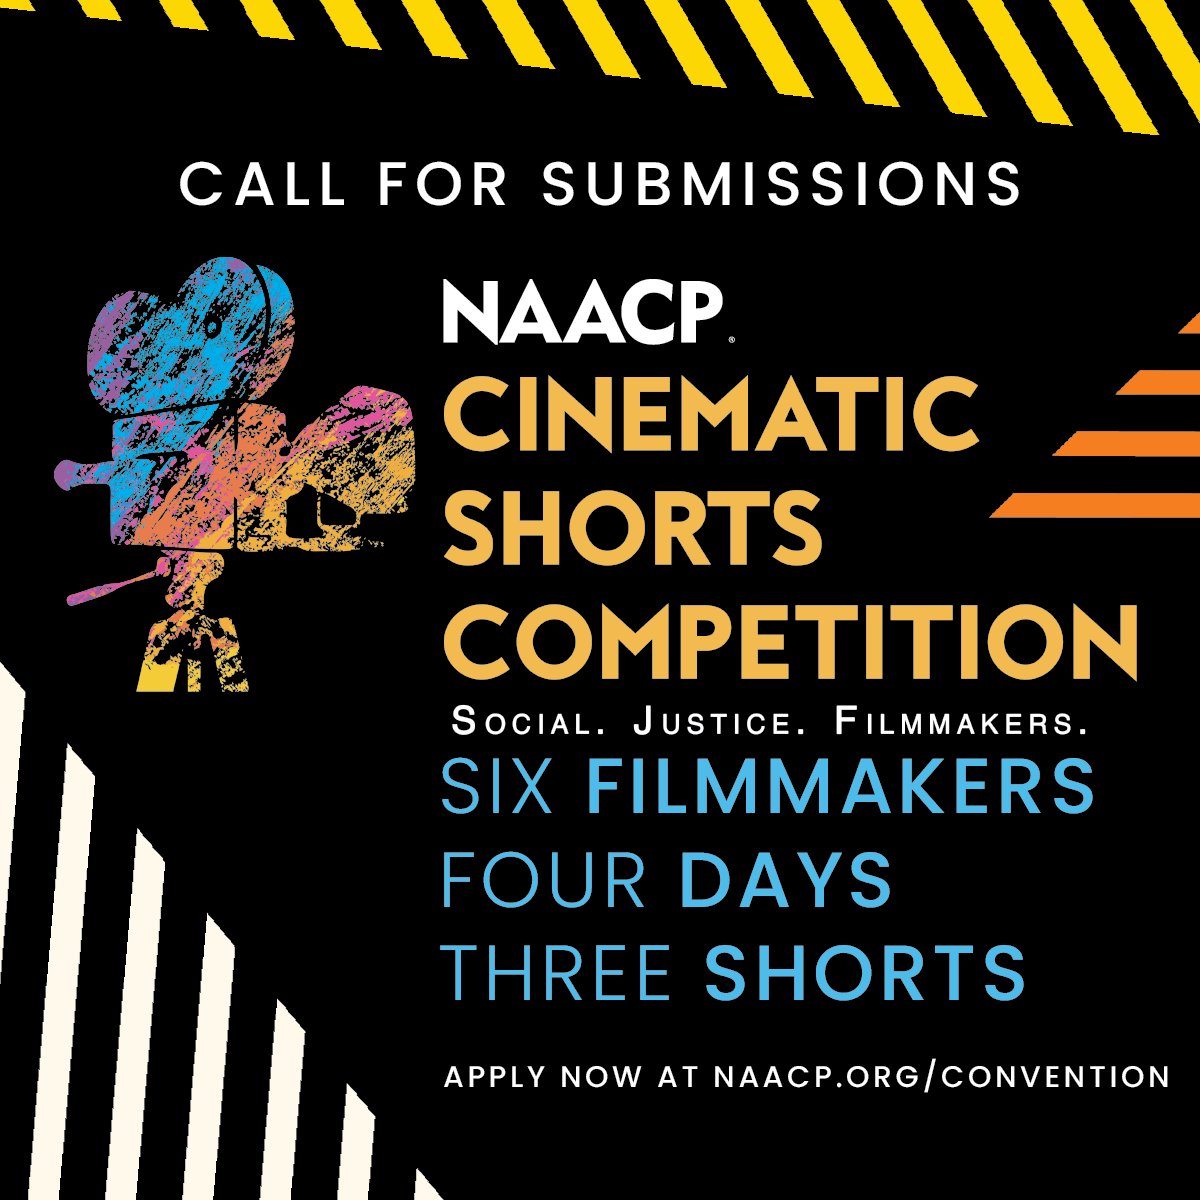 Calling all filmmakers with a passion for social justice! Apply today for a chance to join the NAACP Cinematic Shorts Competition. Learn more: naacp.org/convention